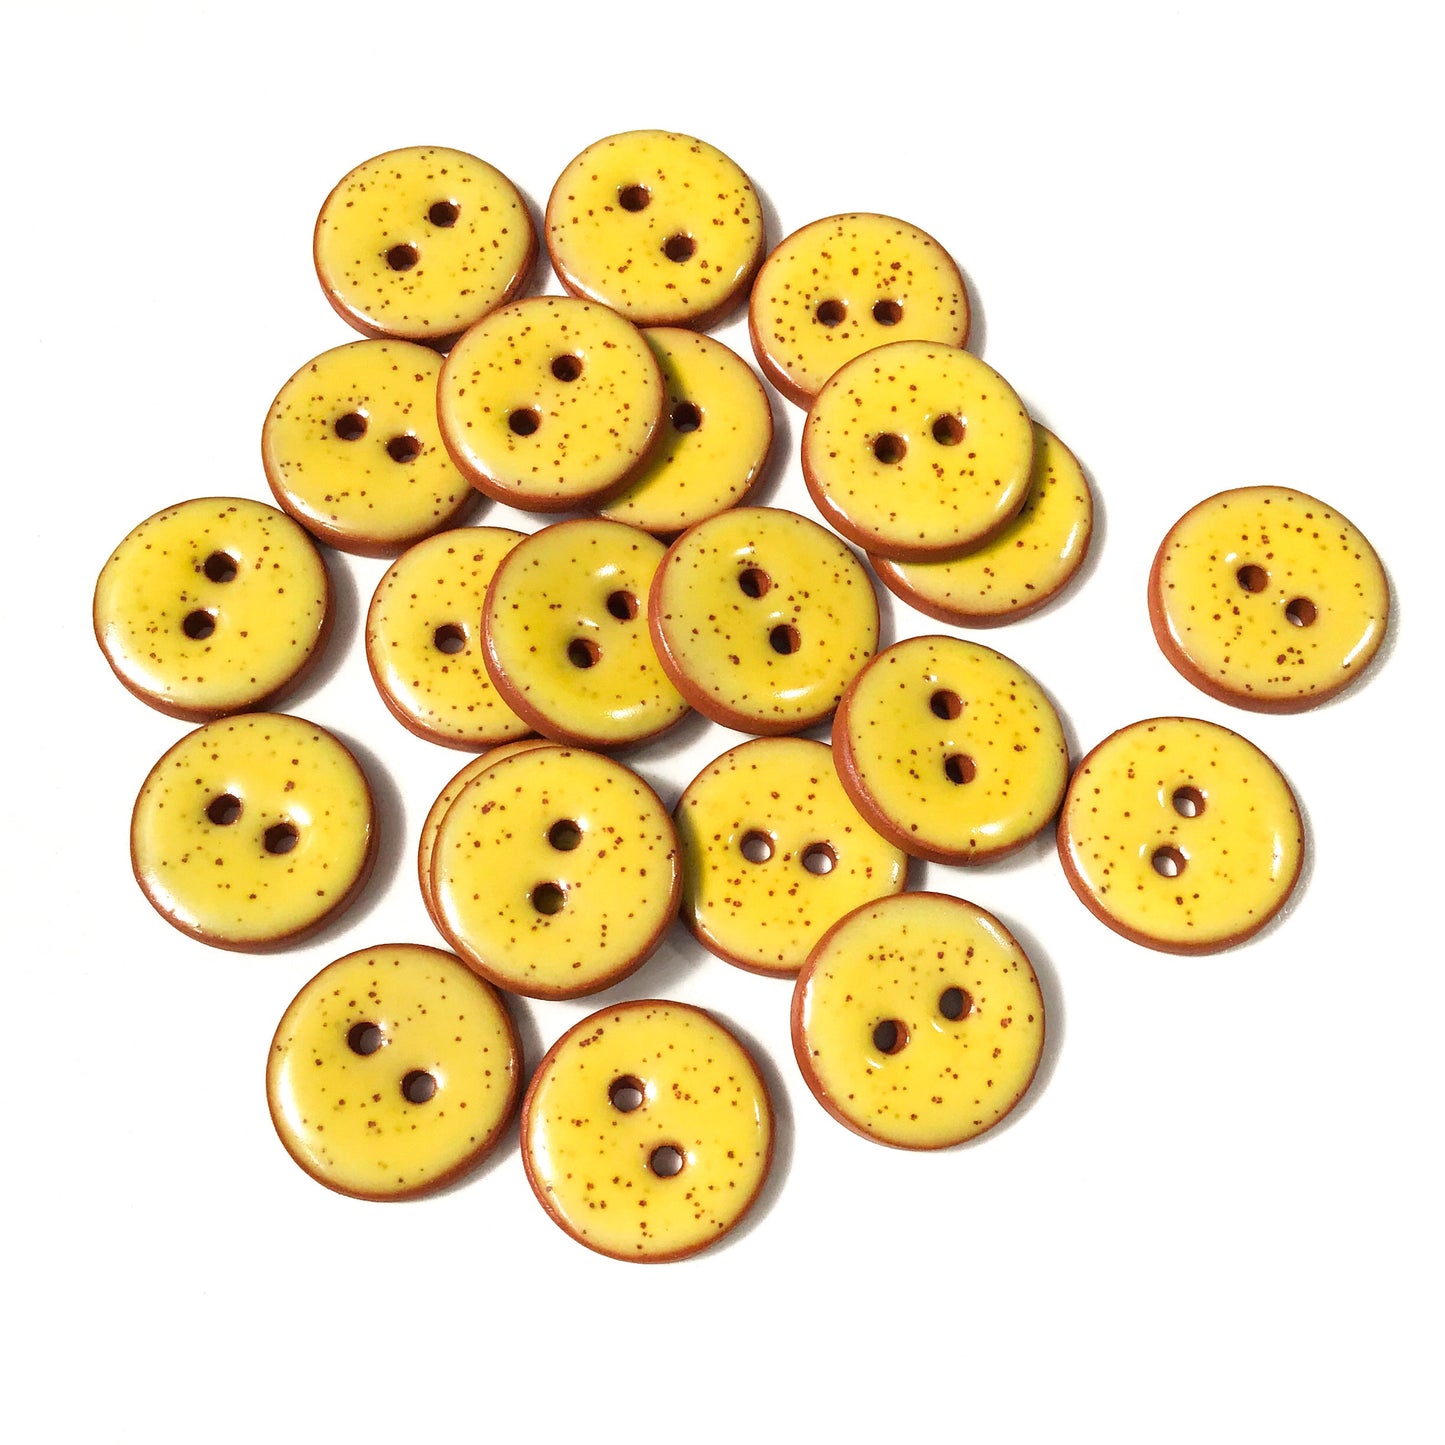 Speckled Yellow Ceramic Buttons - Bright Yellow Pottery Buttons - 3/4"